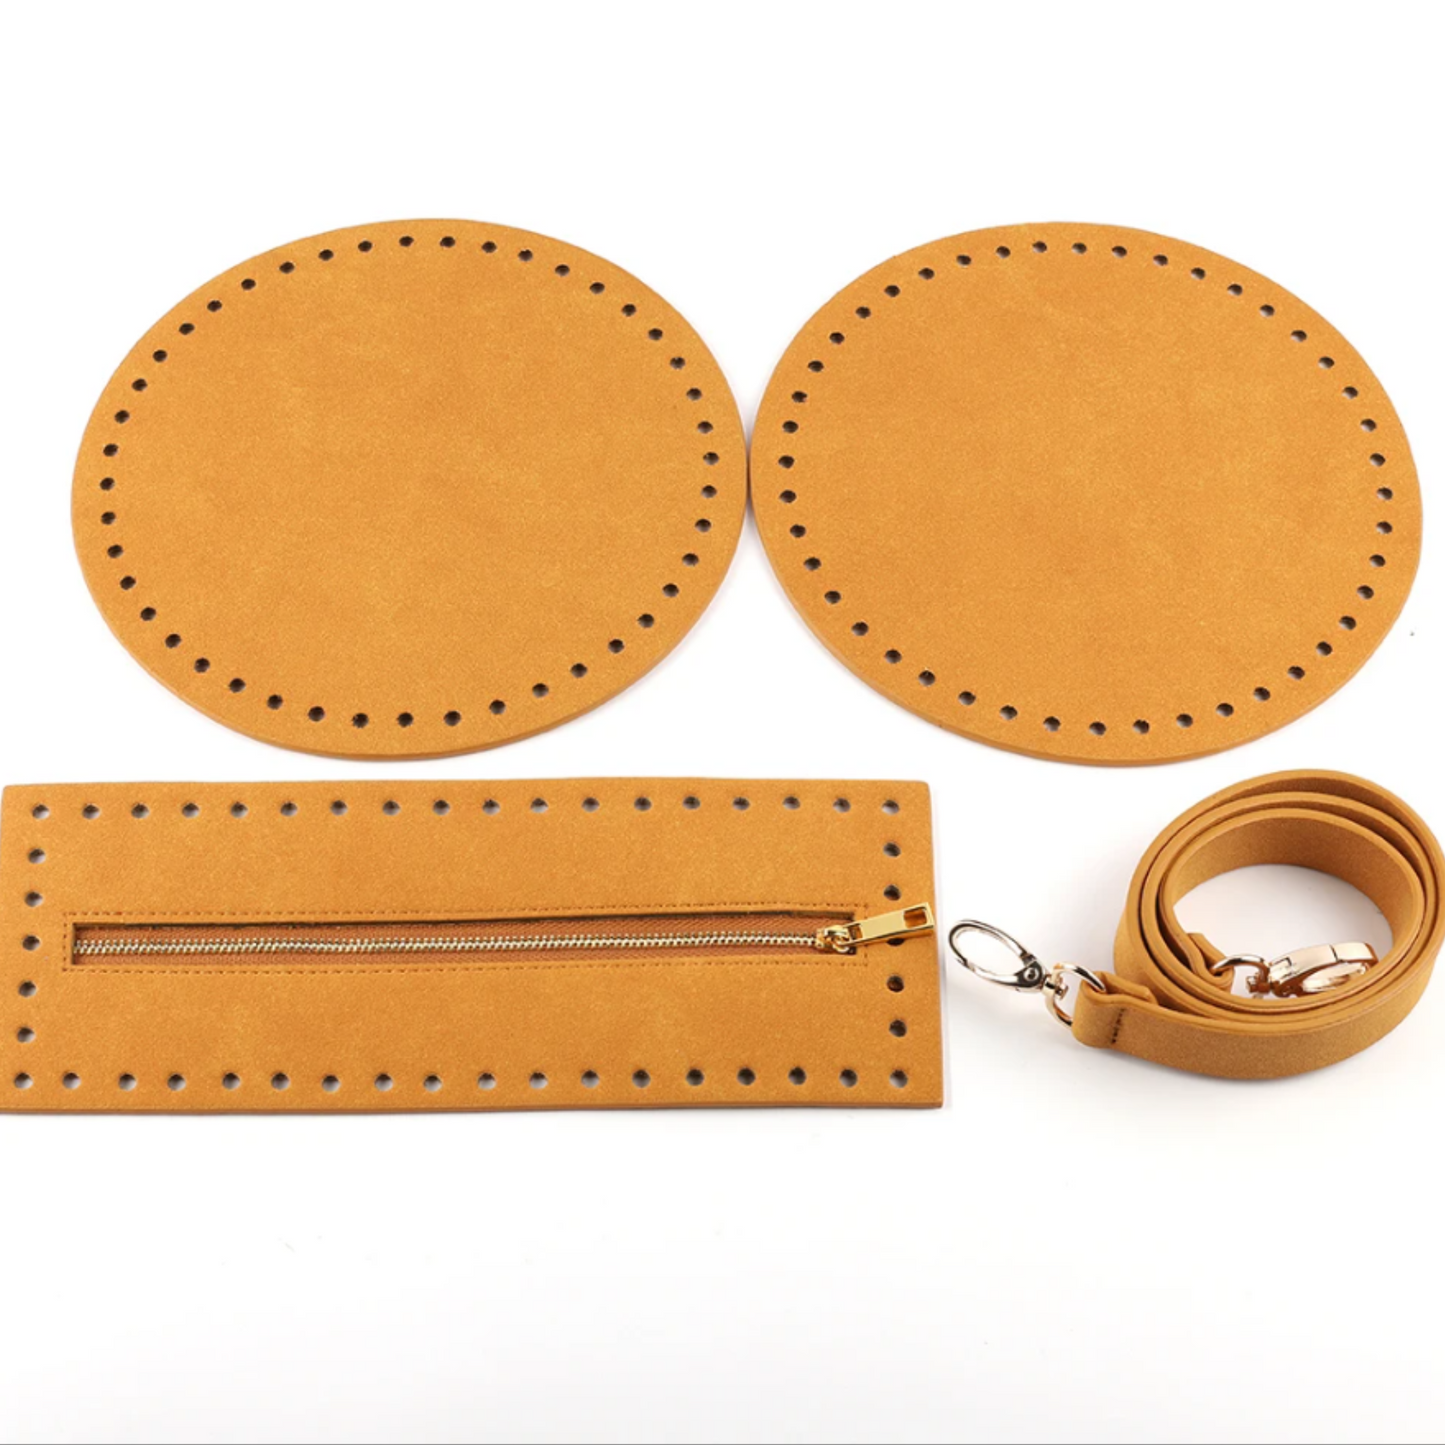 Crochet bag kit round base with leather straps